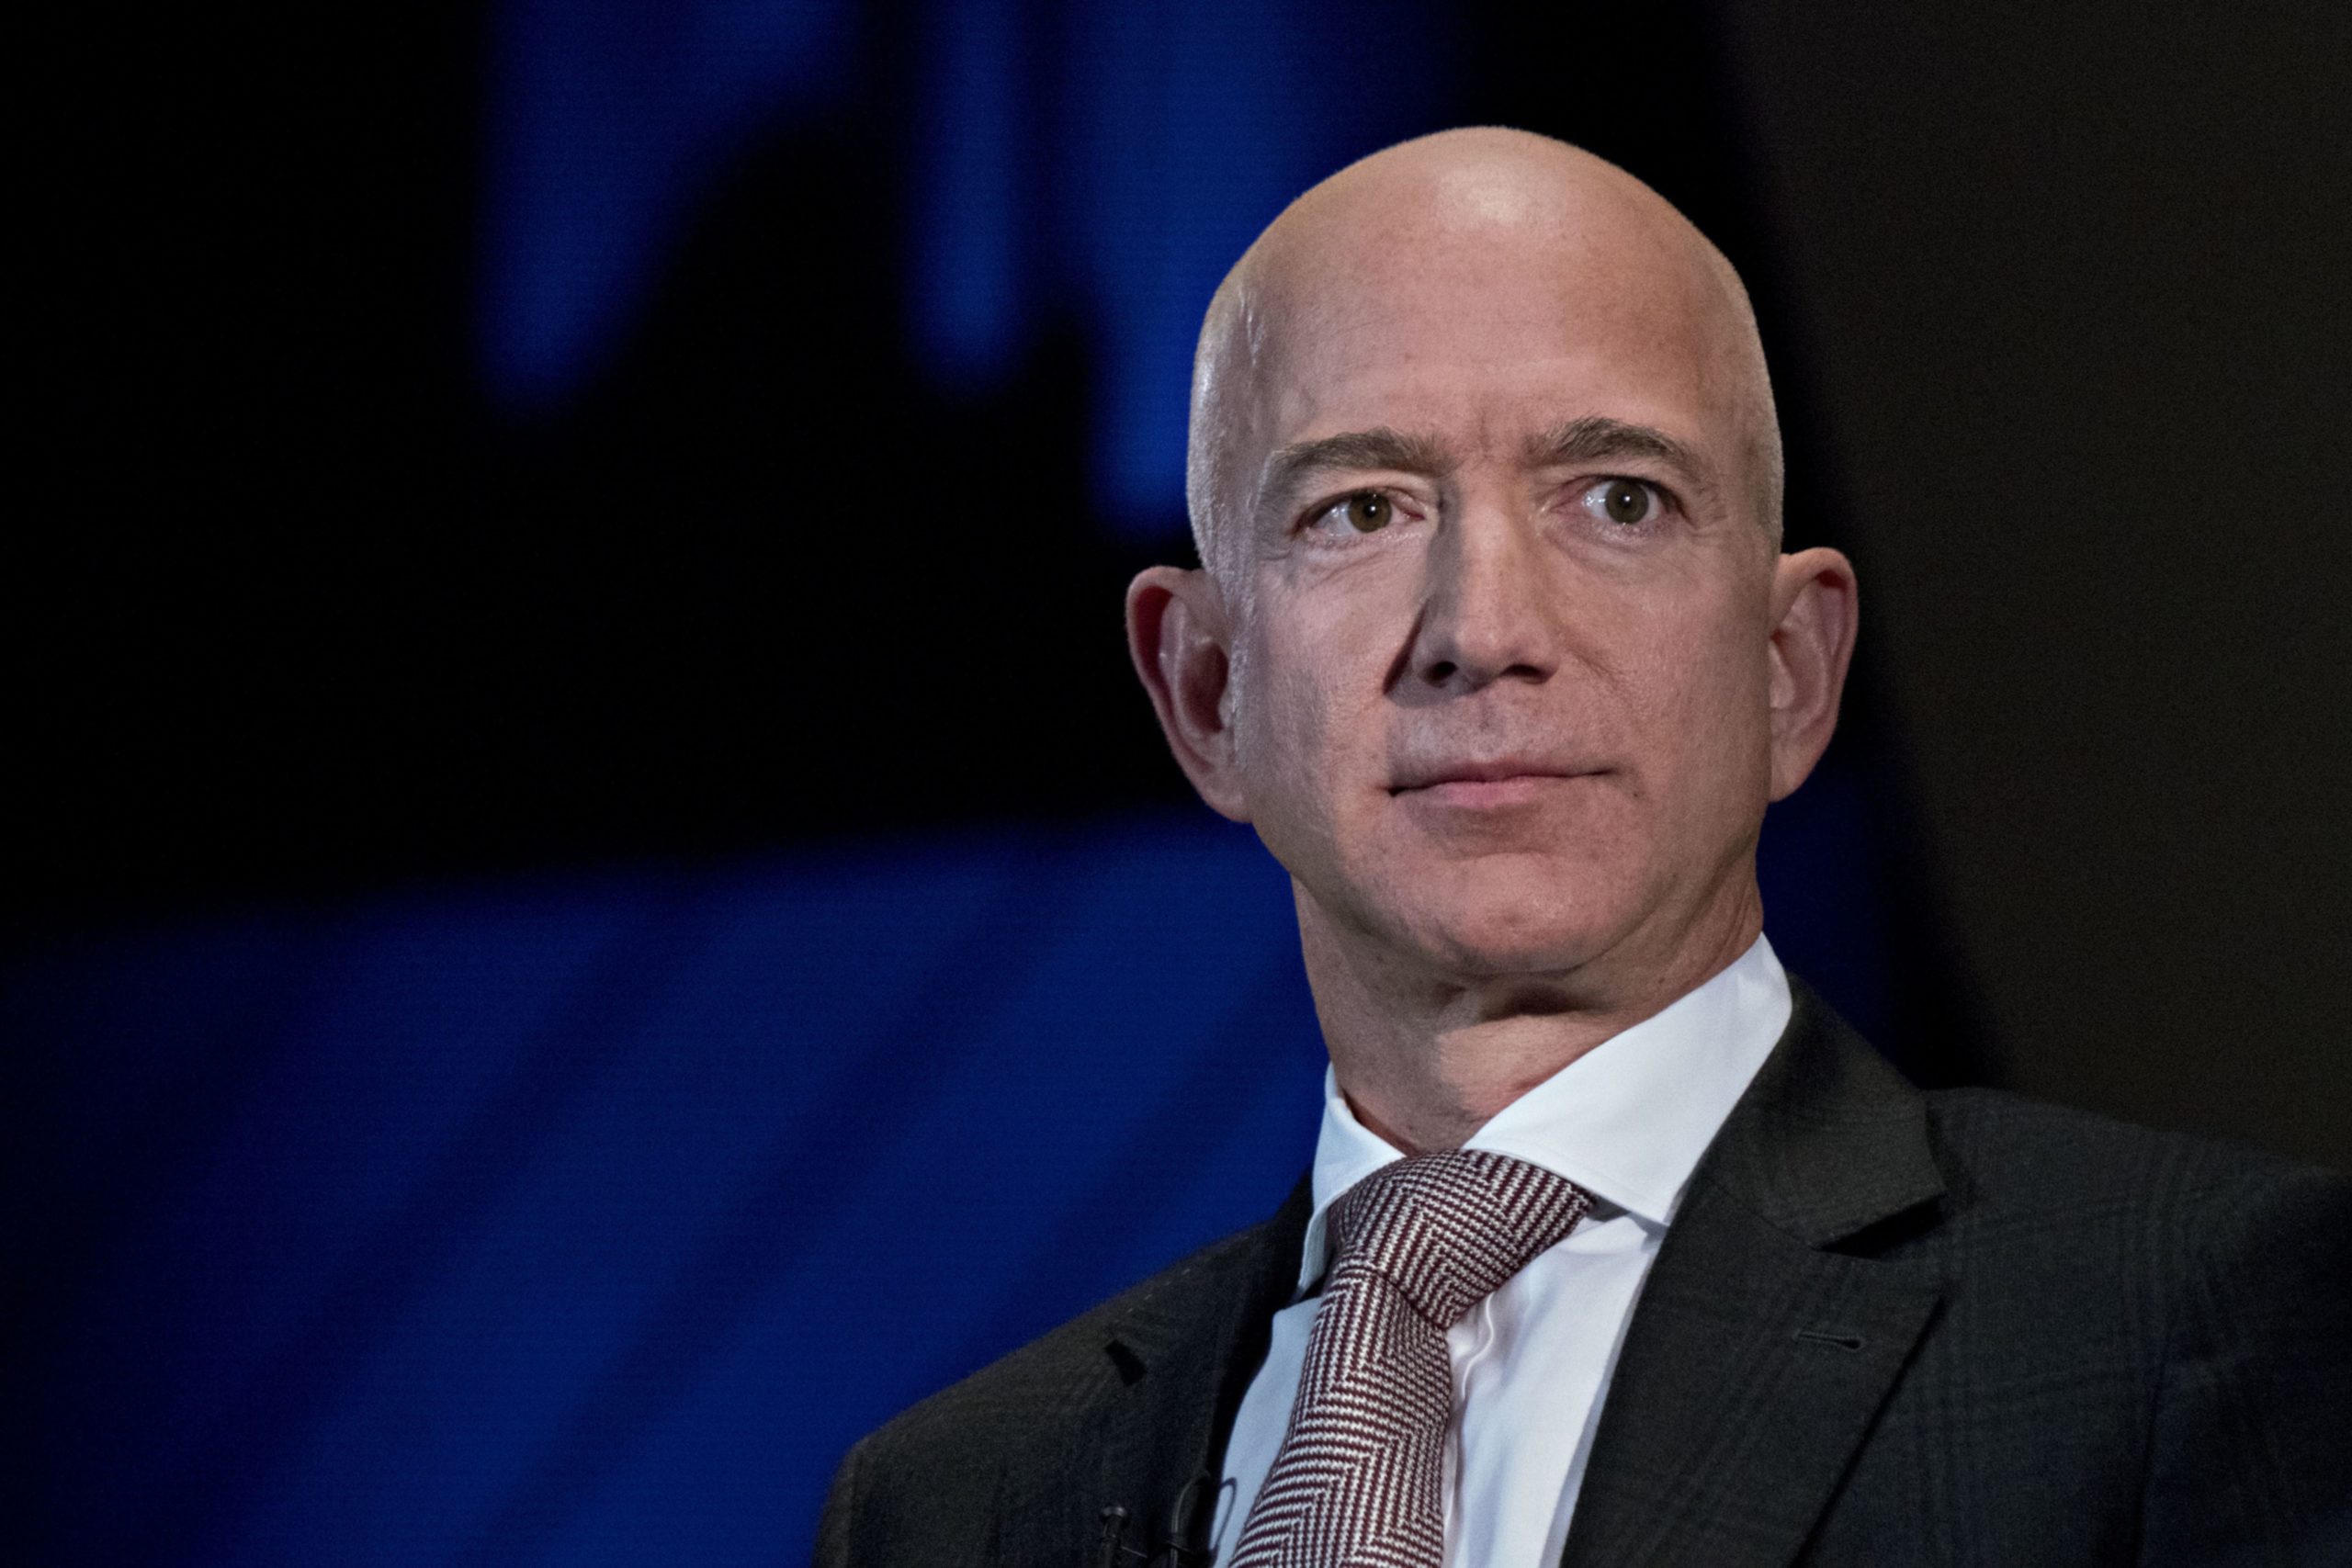 Jeff Bezos, founder and chief executive officer of Amazon.com Inc. Photo: Bloomberg